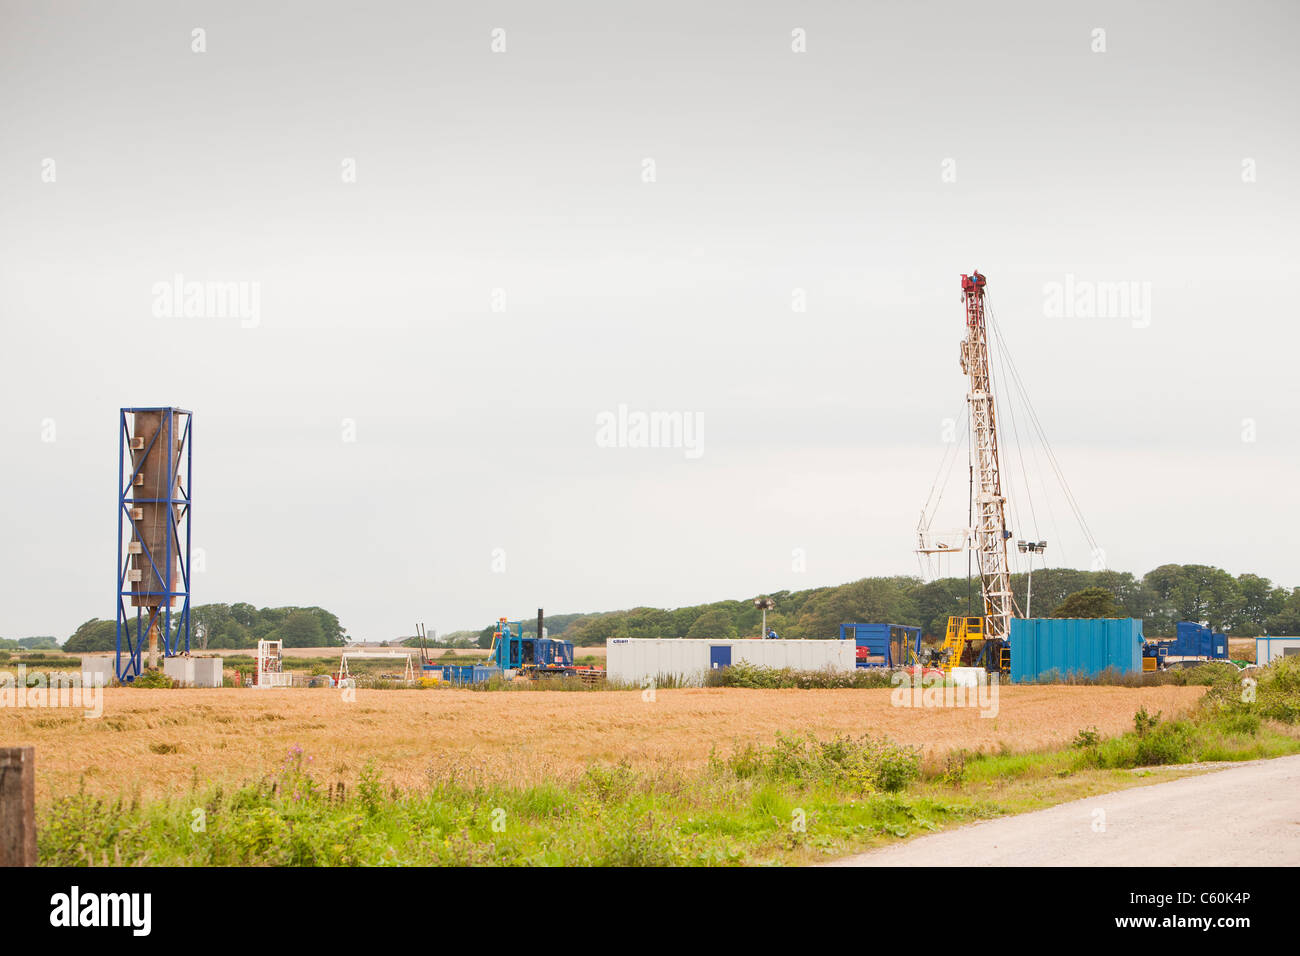 A test drilling site for shale gas at Preese Hall Farm near Blackpool, Lancashire, UK. Stock Photo